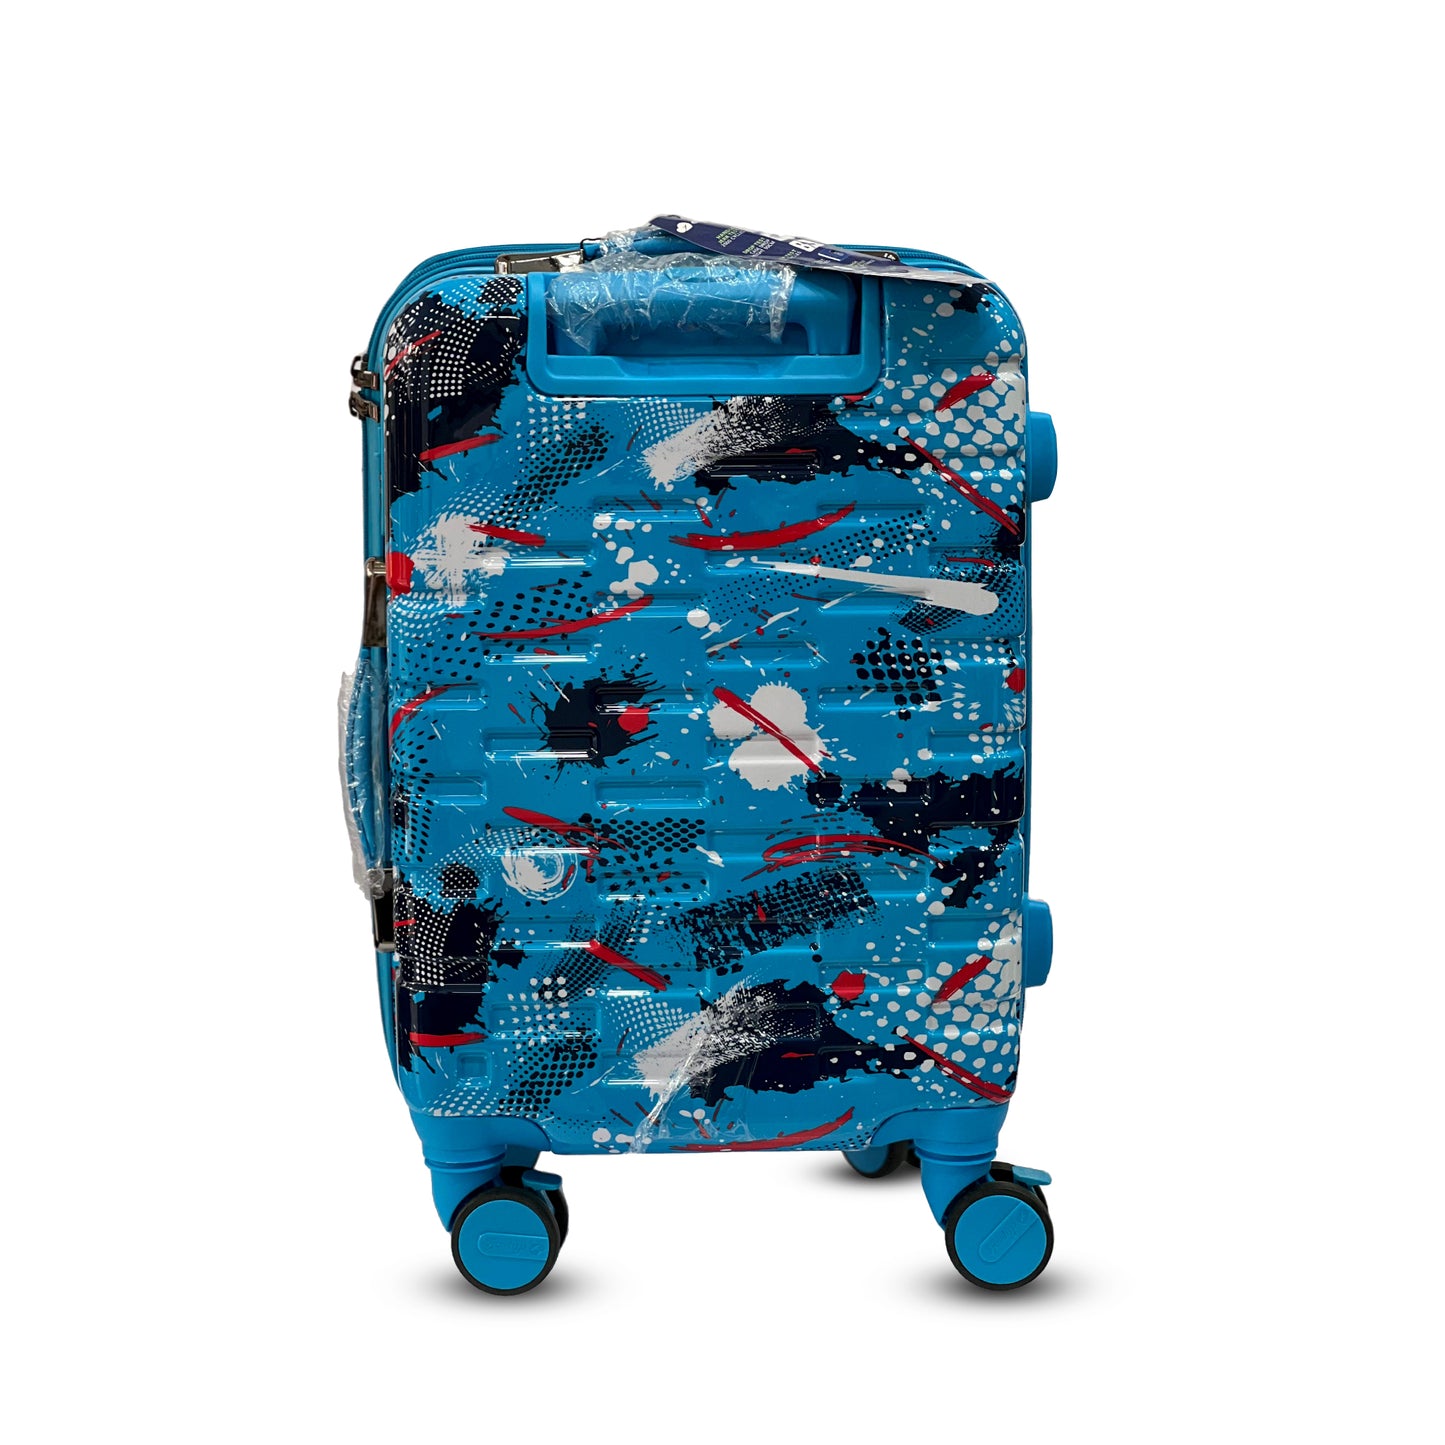 FLY MATE TROLLEY BAG-BLUE